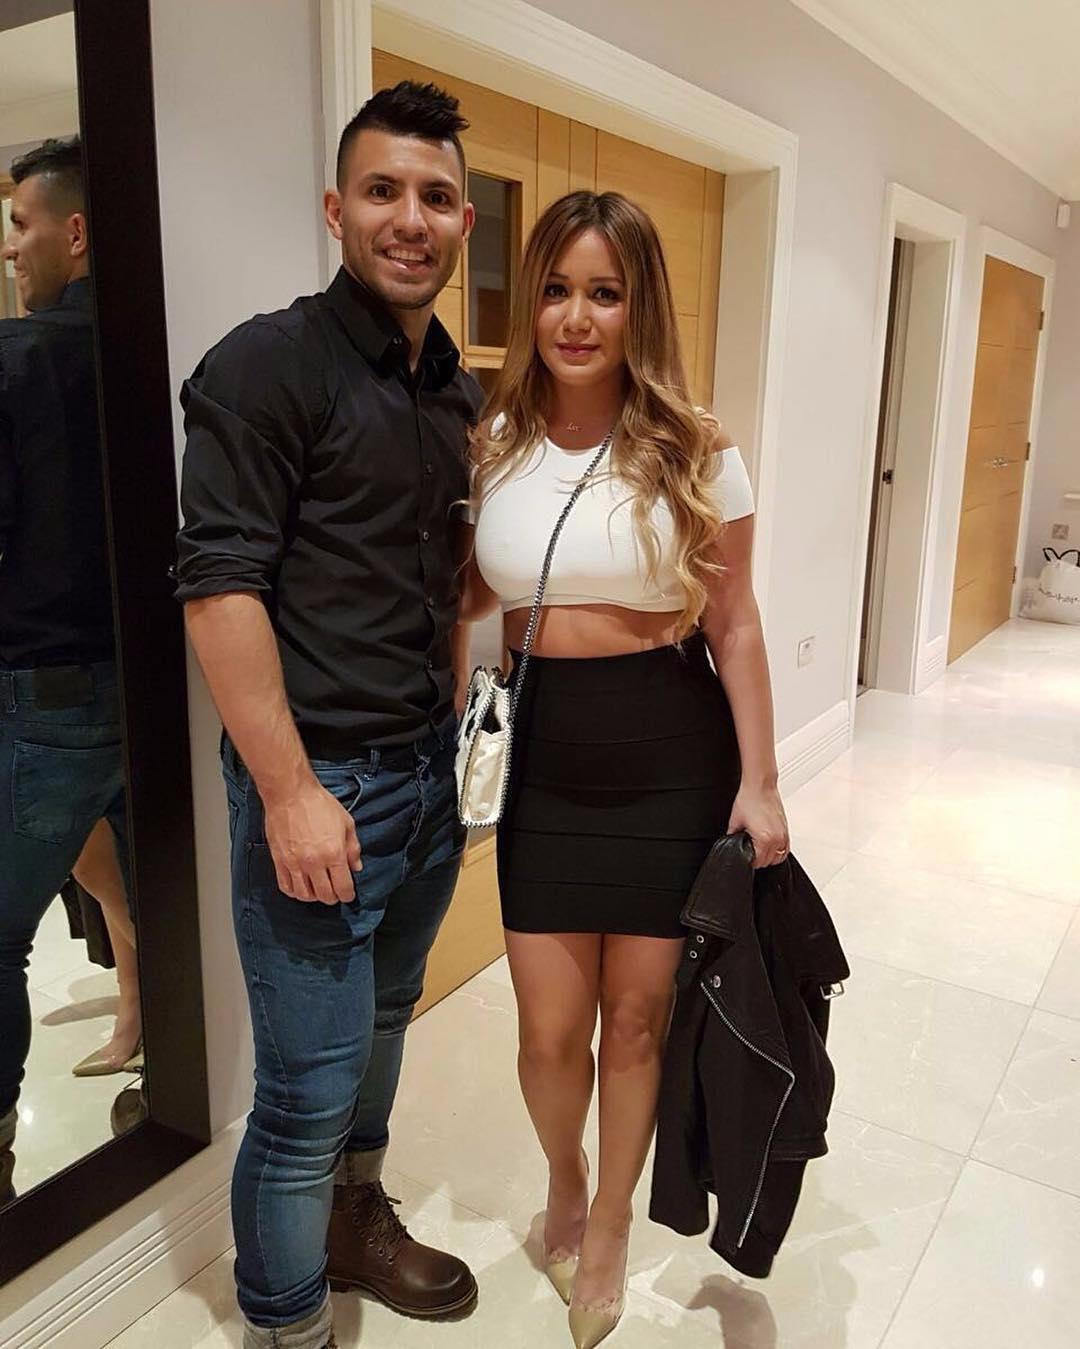  Aguero was with the Argentinian singer for four years